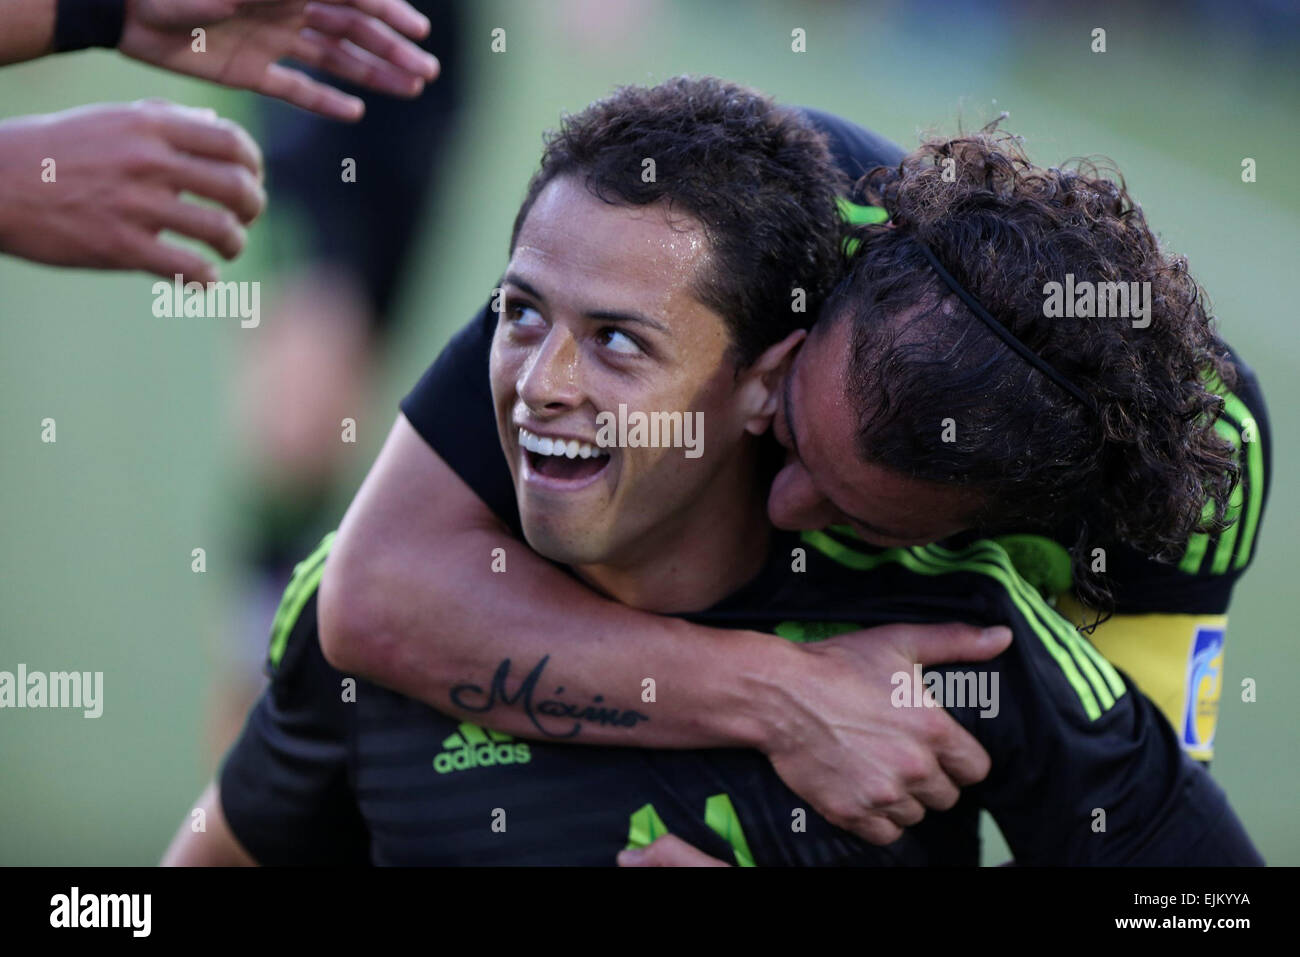 California, USA. 28th Mar, 2015. Mexico's Javier Hernandez (L) celebrates his goal during the international friendly match, against Ecuador, held in the Los Angeles Memorial Coliseum, in Los Angeles city, California state, the United States, on March 28, 2015. Mexico won 1-0. Credit:  Omar Vega/NOTIMEX/Xinhua/Alamy Live News Stock Photo